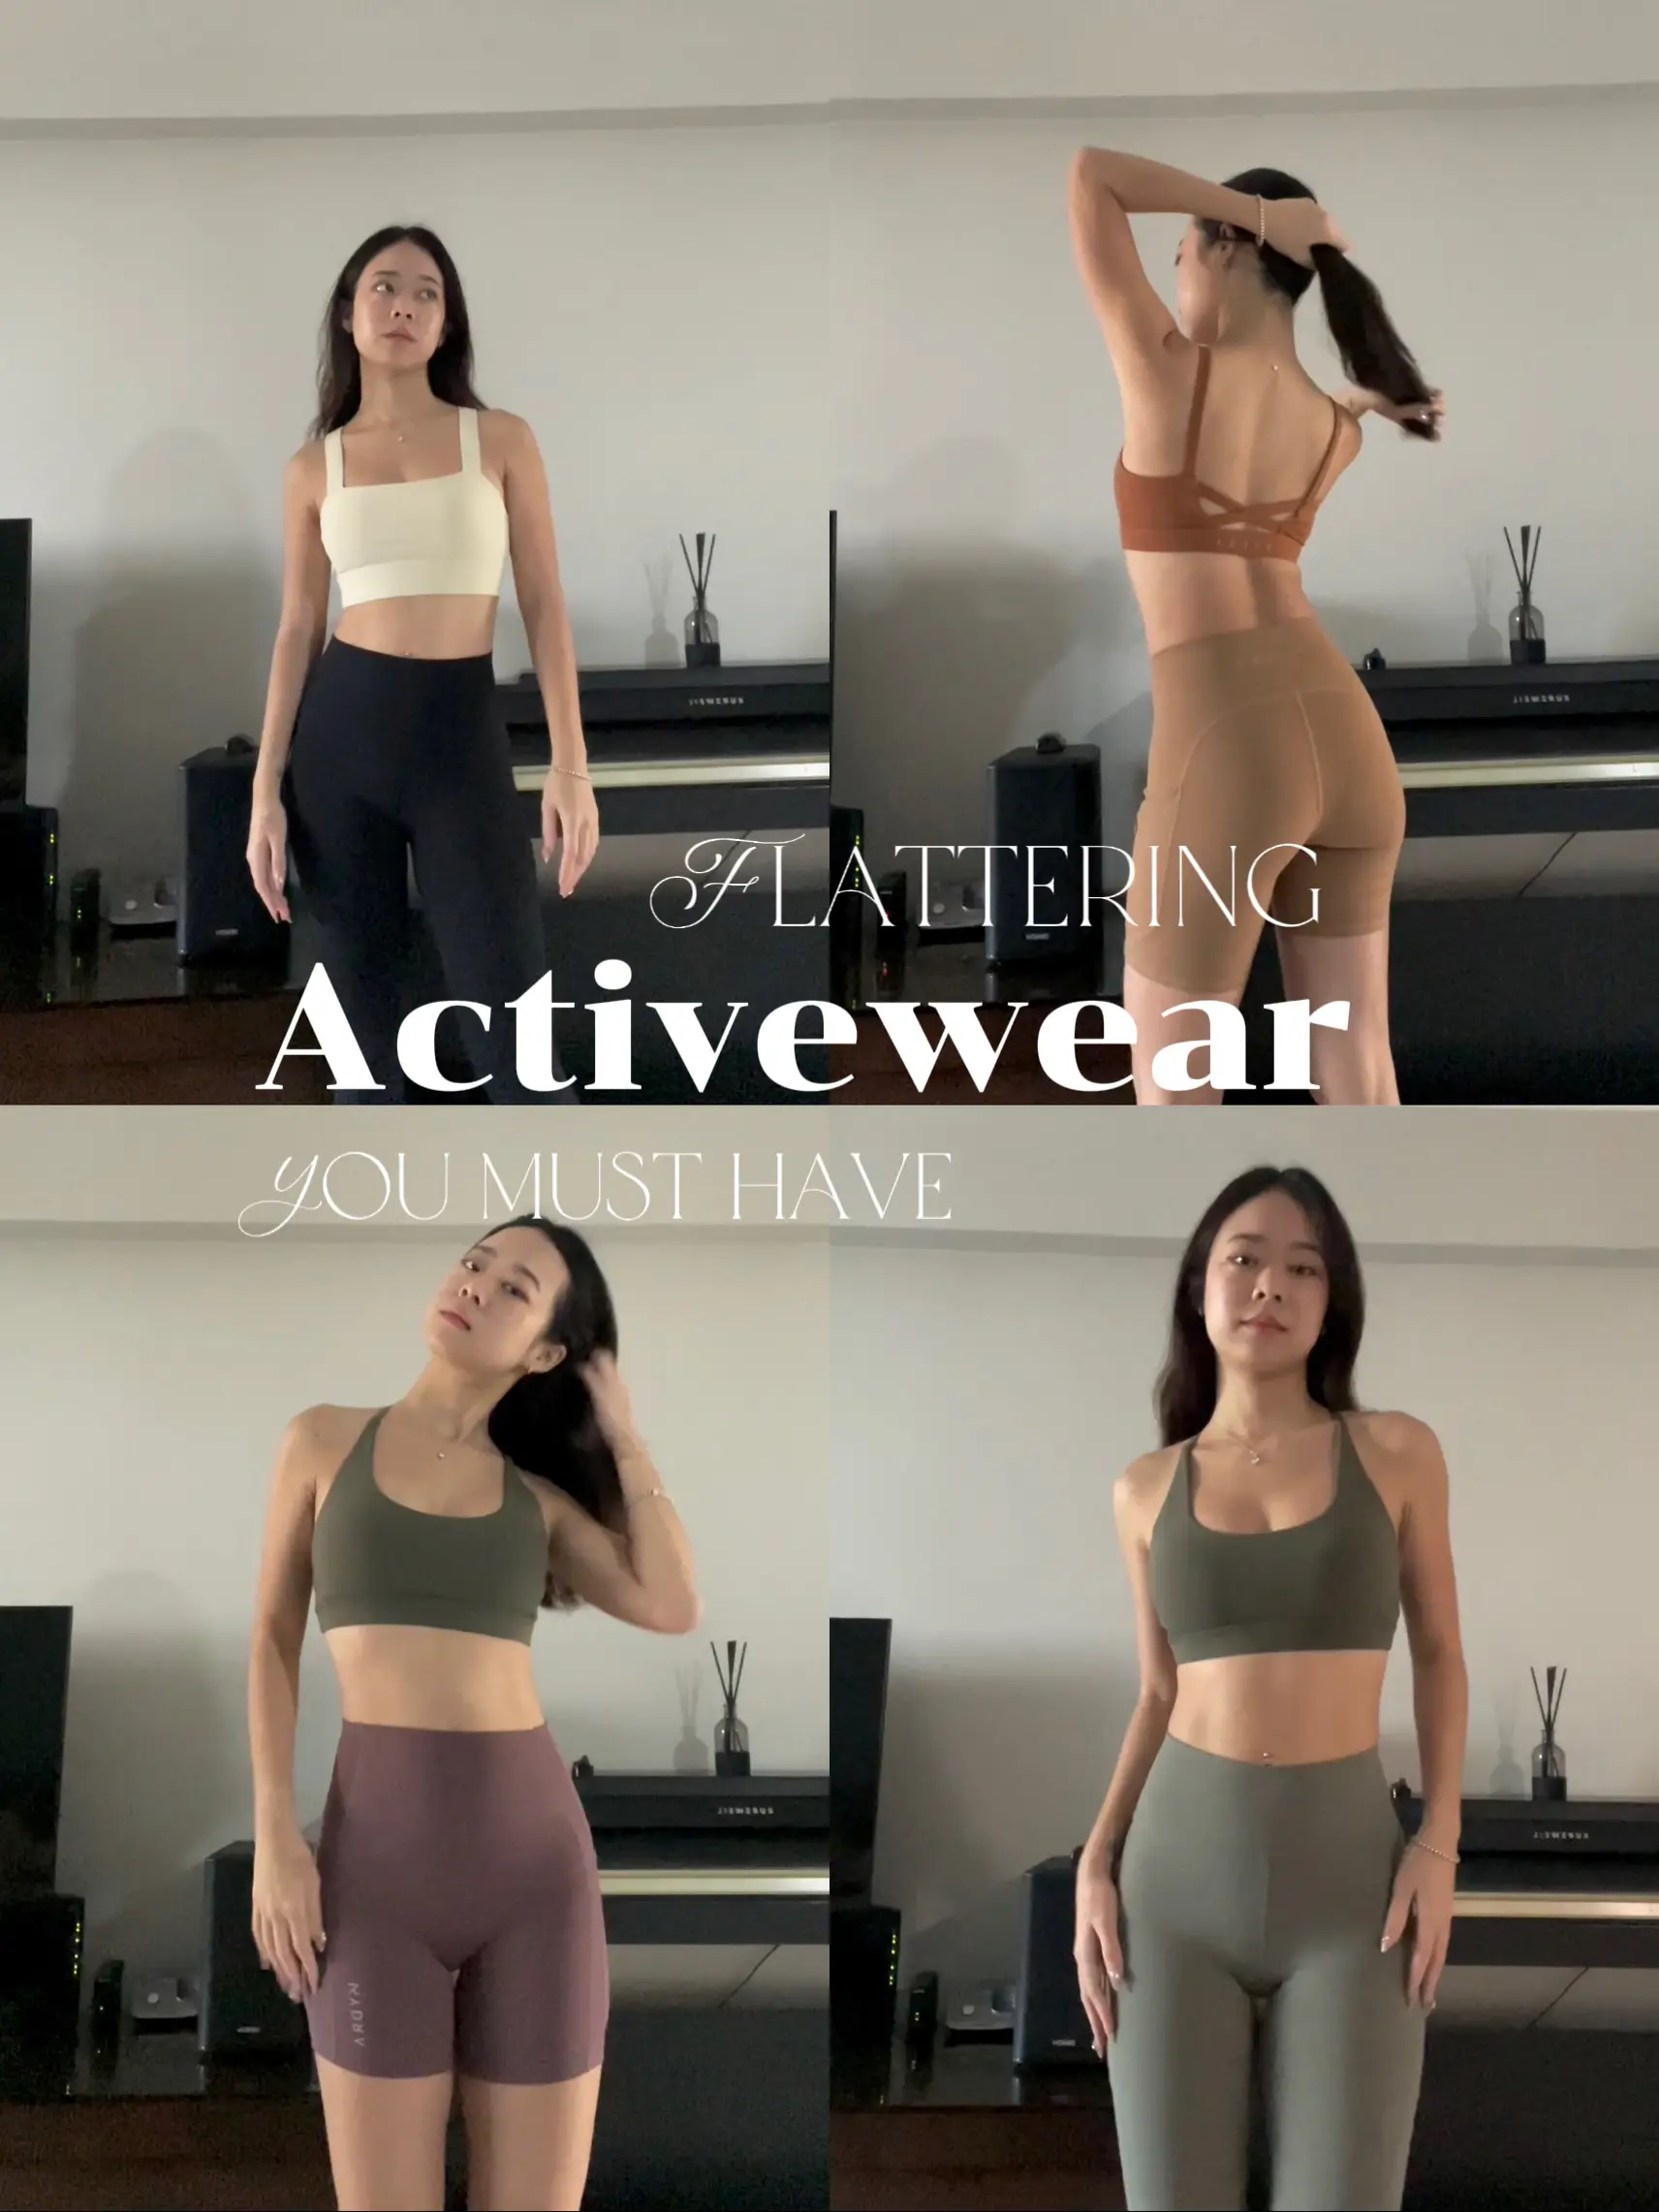 Yogalicious lux cropped athletic - Gem